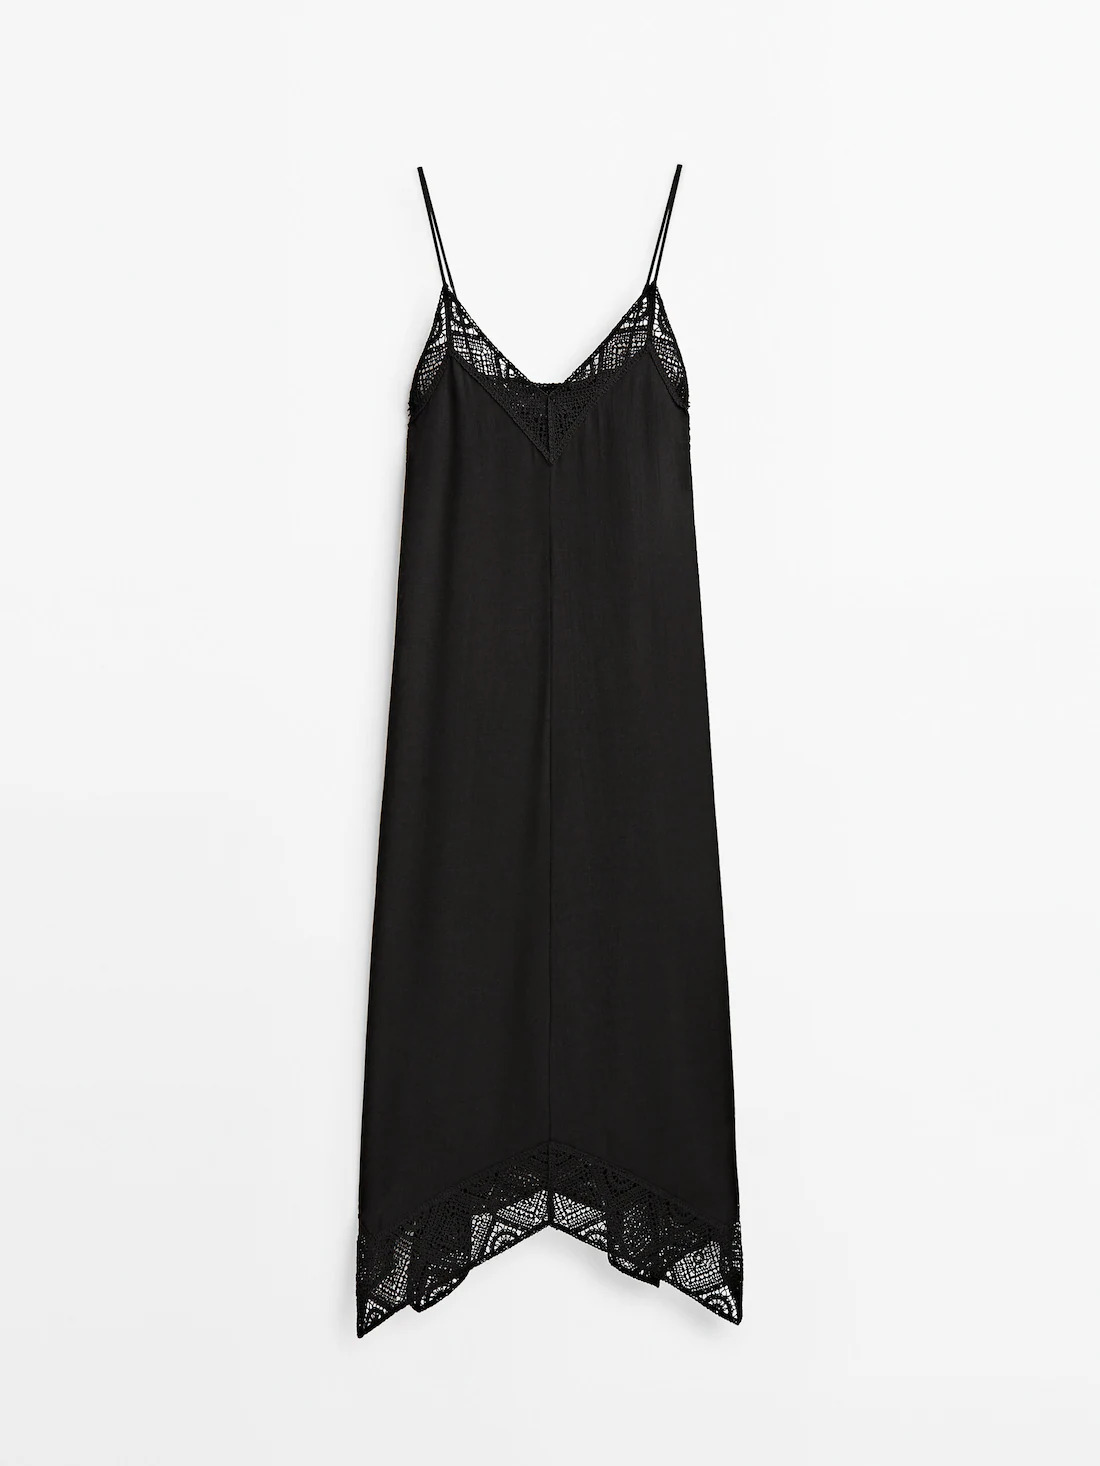 The Lace Slip Dress Trend Is Back Again—Here Are the Best | Who What ...